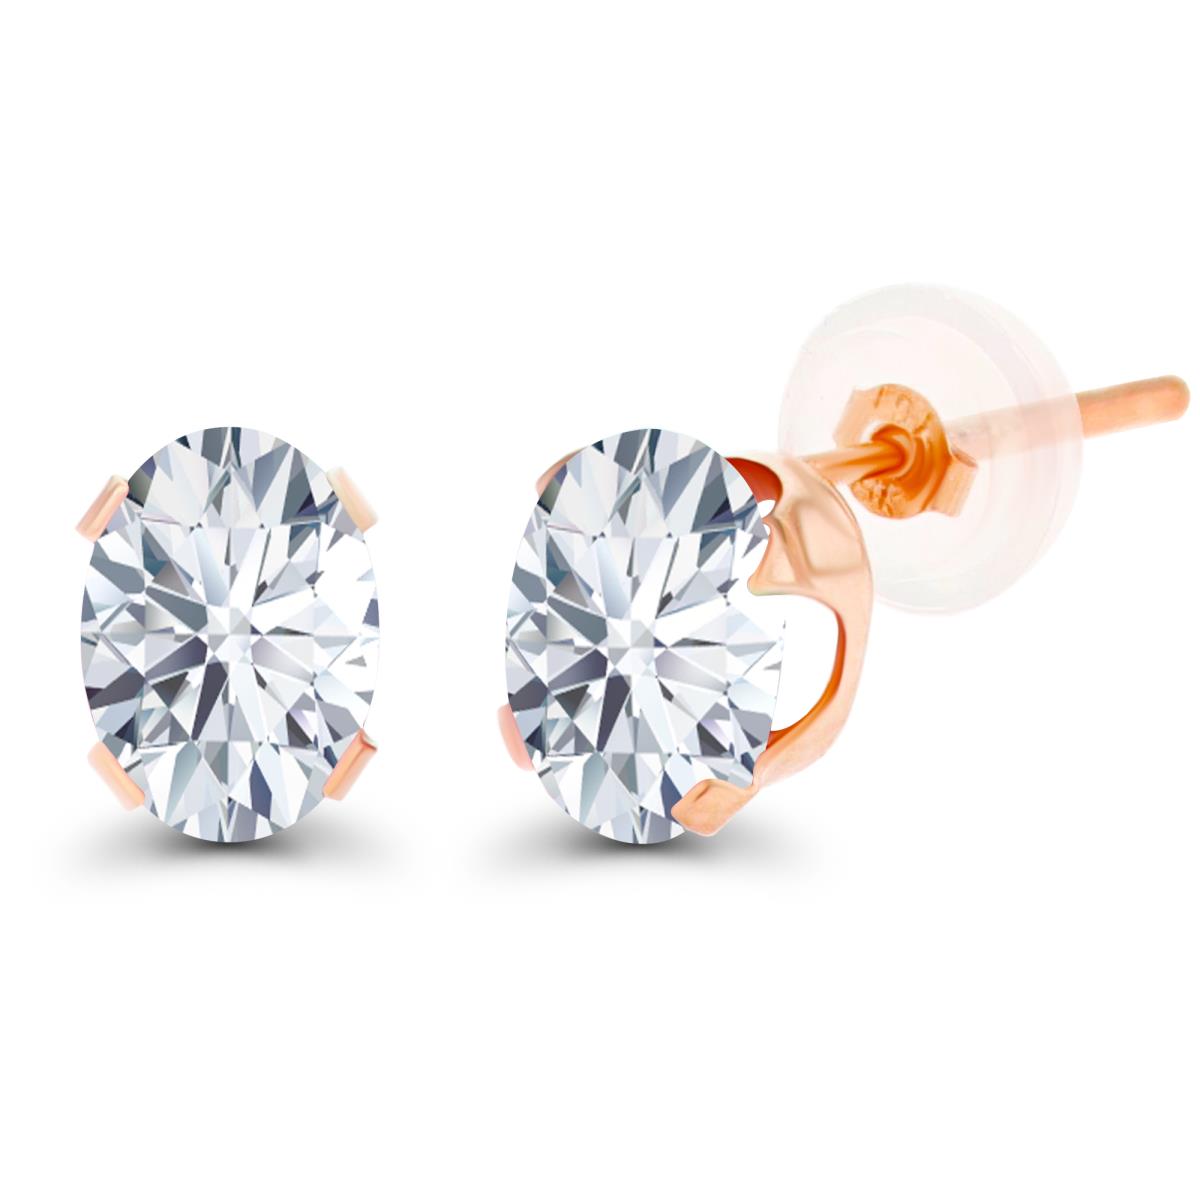 14K Rose Gold 7x5mm Oval White Topaz Stud Earring with Silicone Back